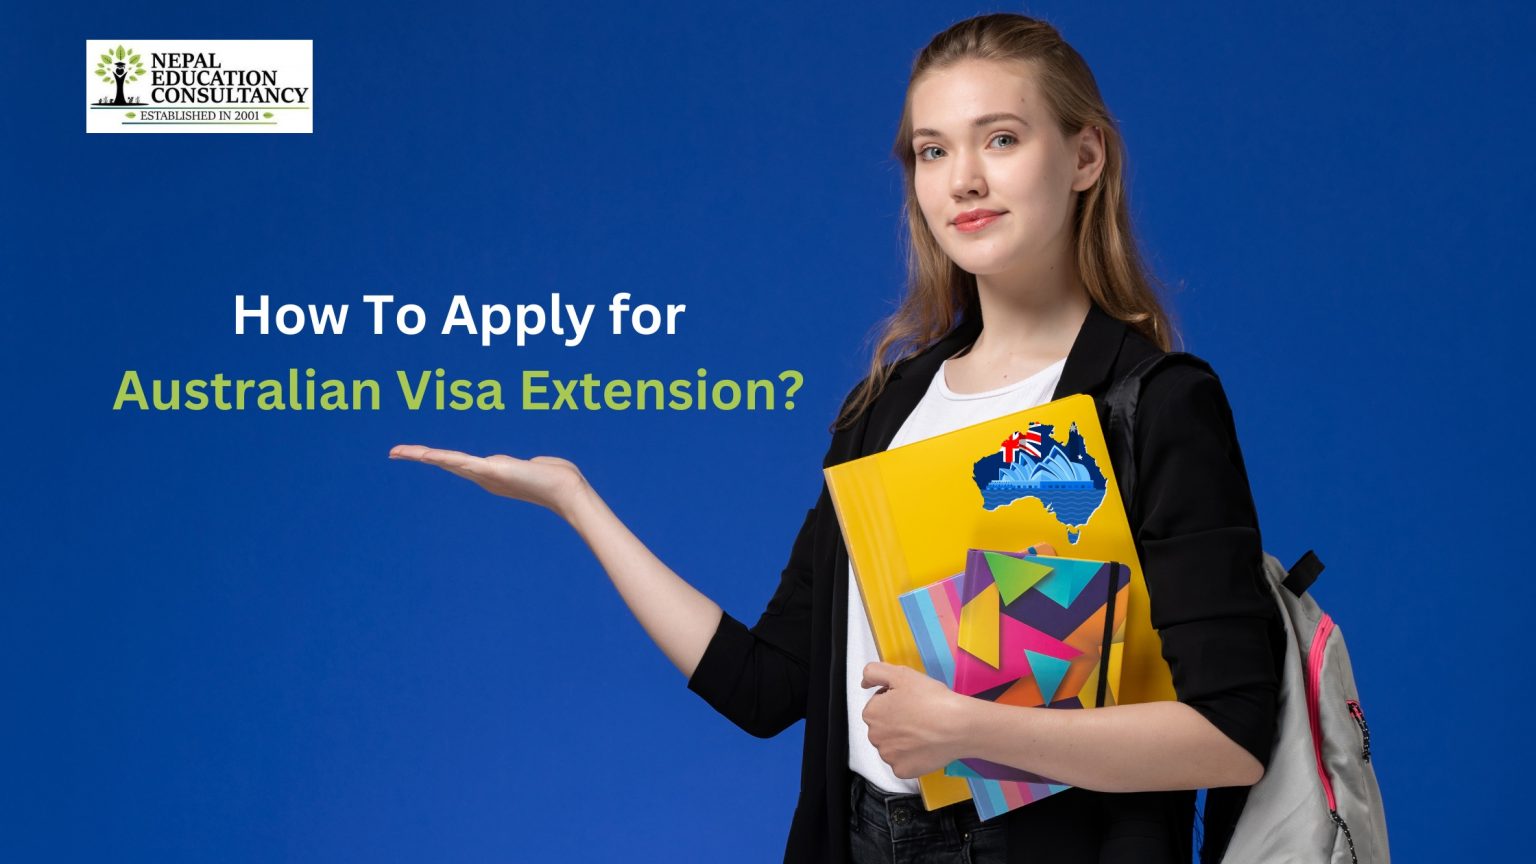 Australia Visa Extension for Nepali Students: How to Apply?